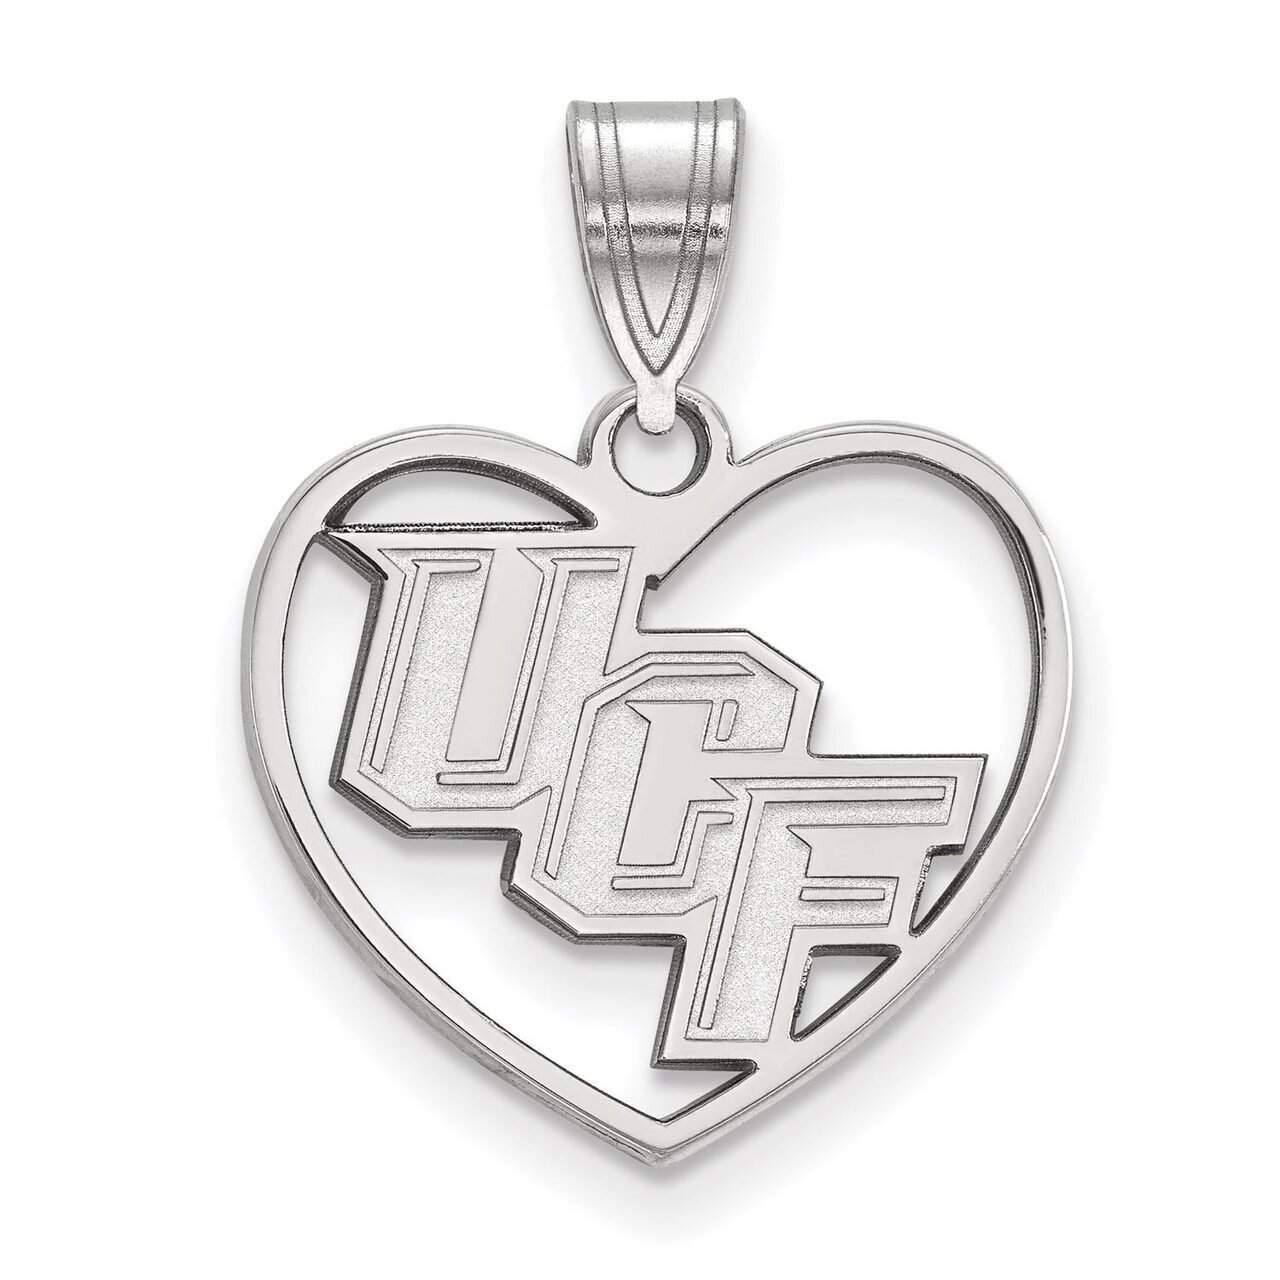 University of Central Florida Pendant in Heart Sterling Silver SS013UCF